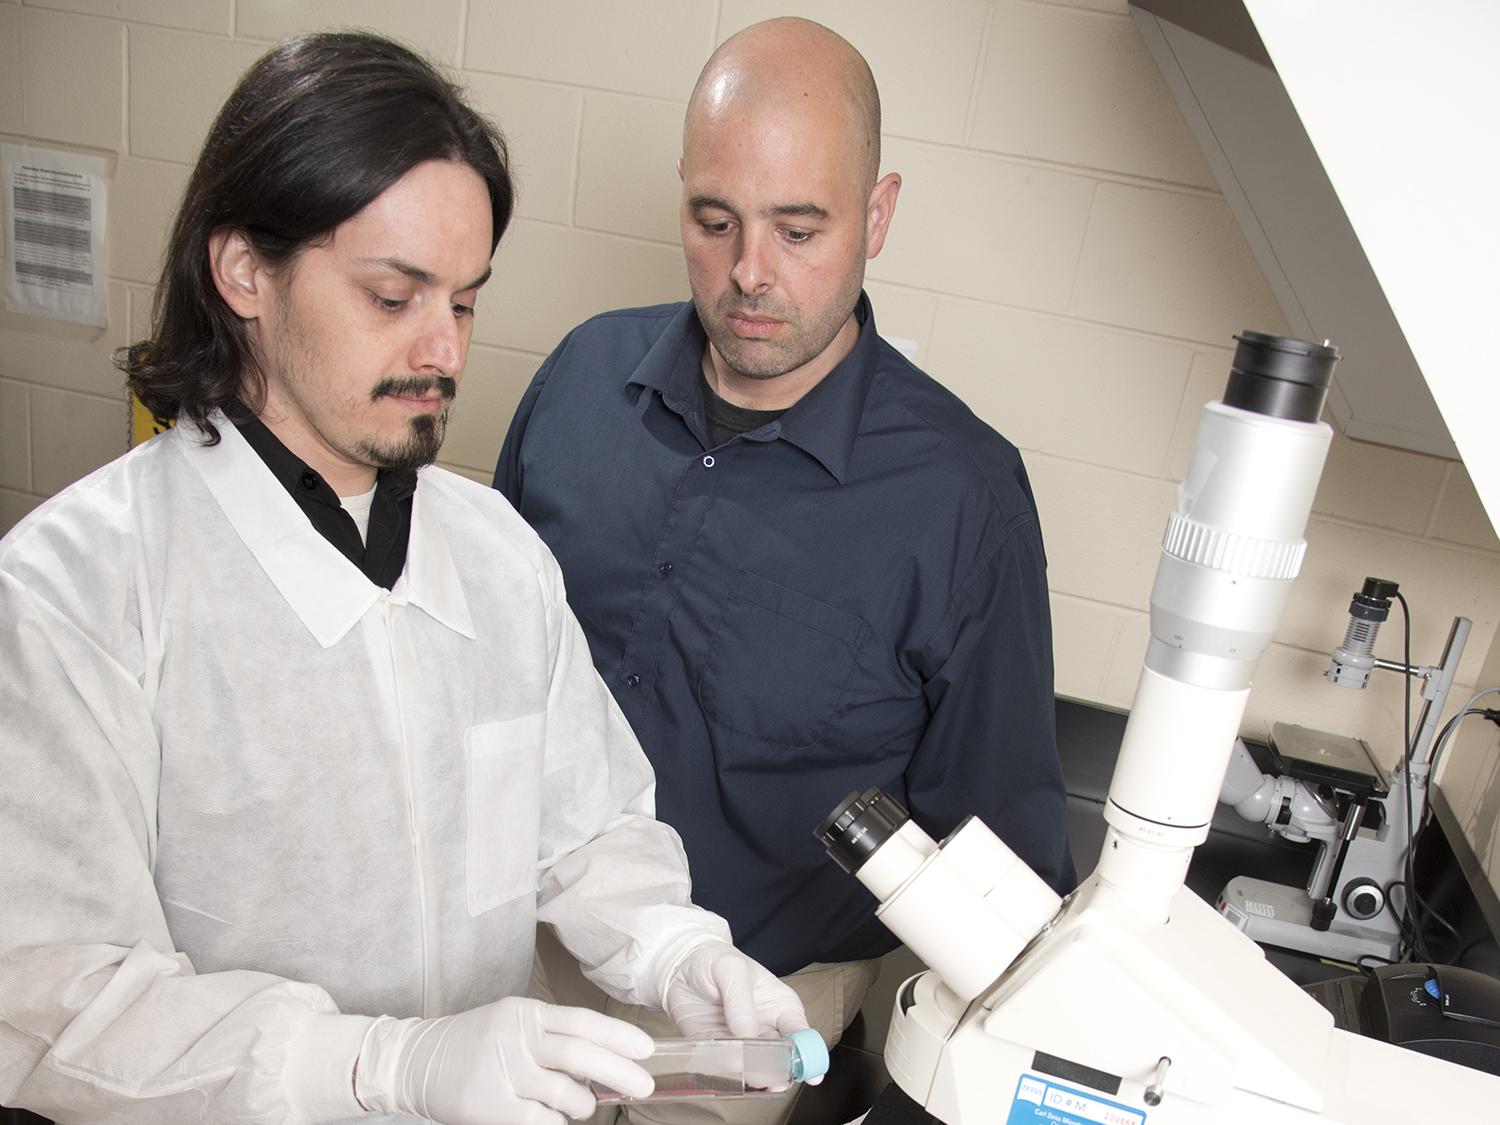 Drs. Peres Ramos Badial, left, and Camillo Bulla, researches in the Mississippi State University College of Veterinary Medicine, study how platelets alter cancer cells and help them metastasize. (Photo by MSU College of Veterinary Medicine/Tom Thompson)